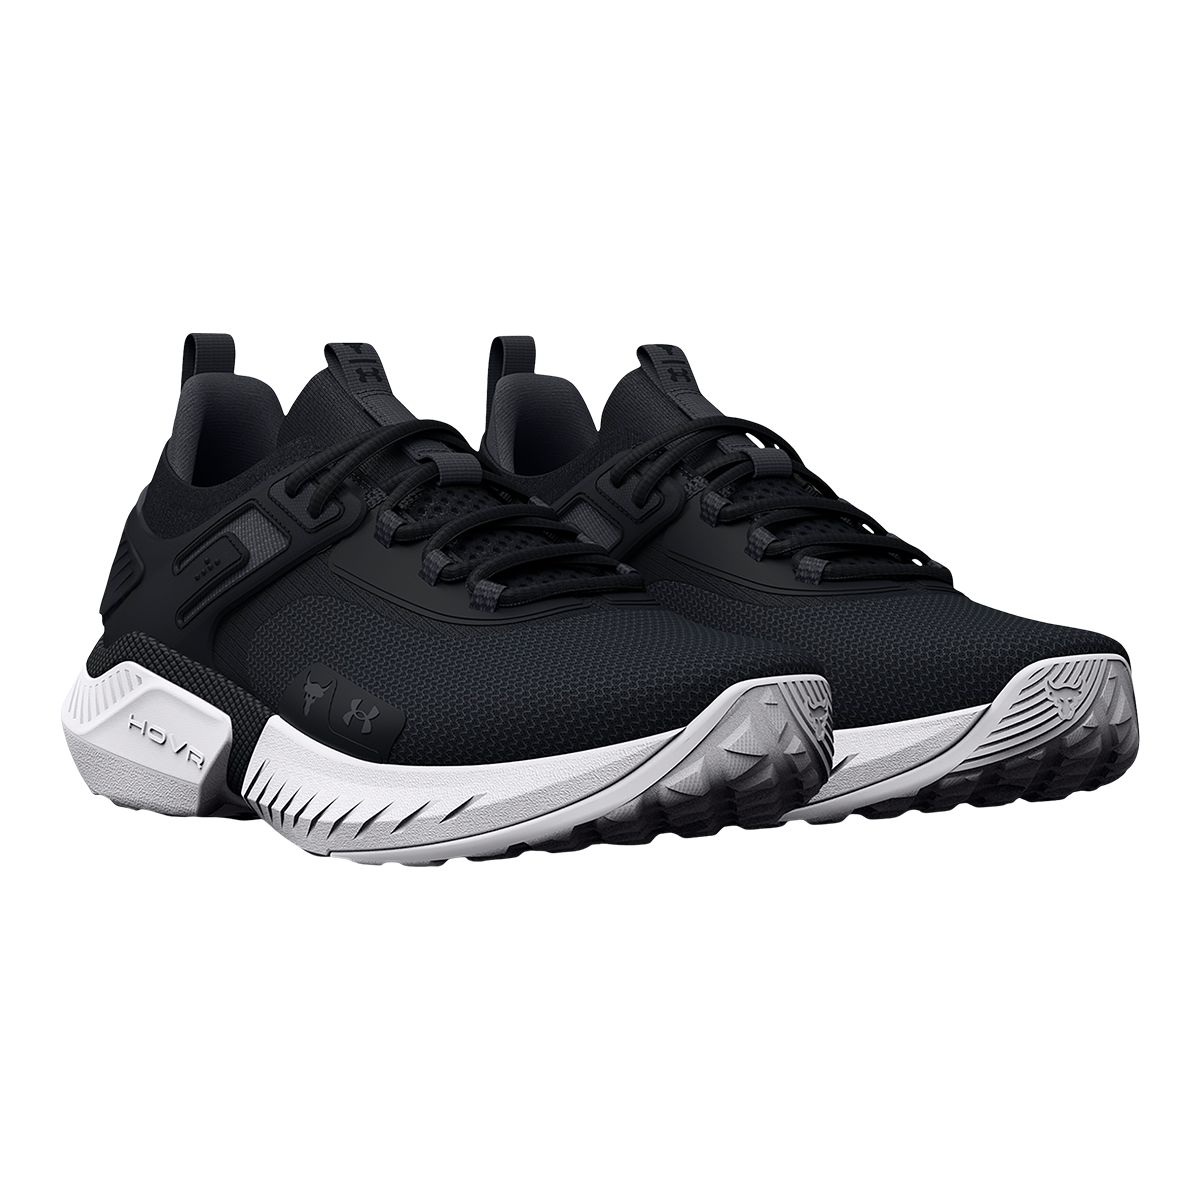 Under Armour Women's Project Rock 5 Training Shoes